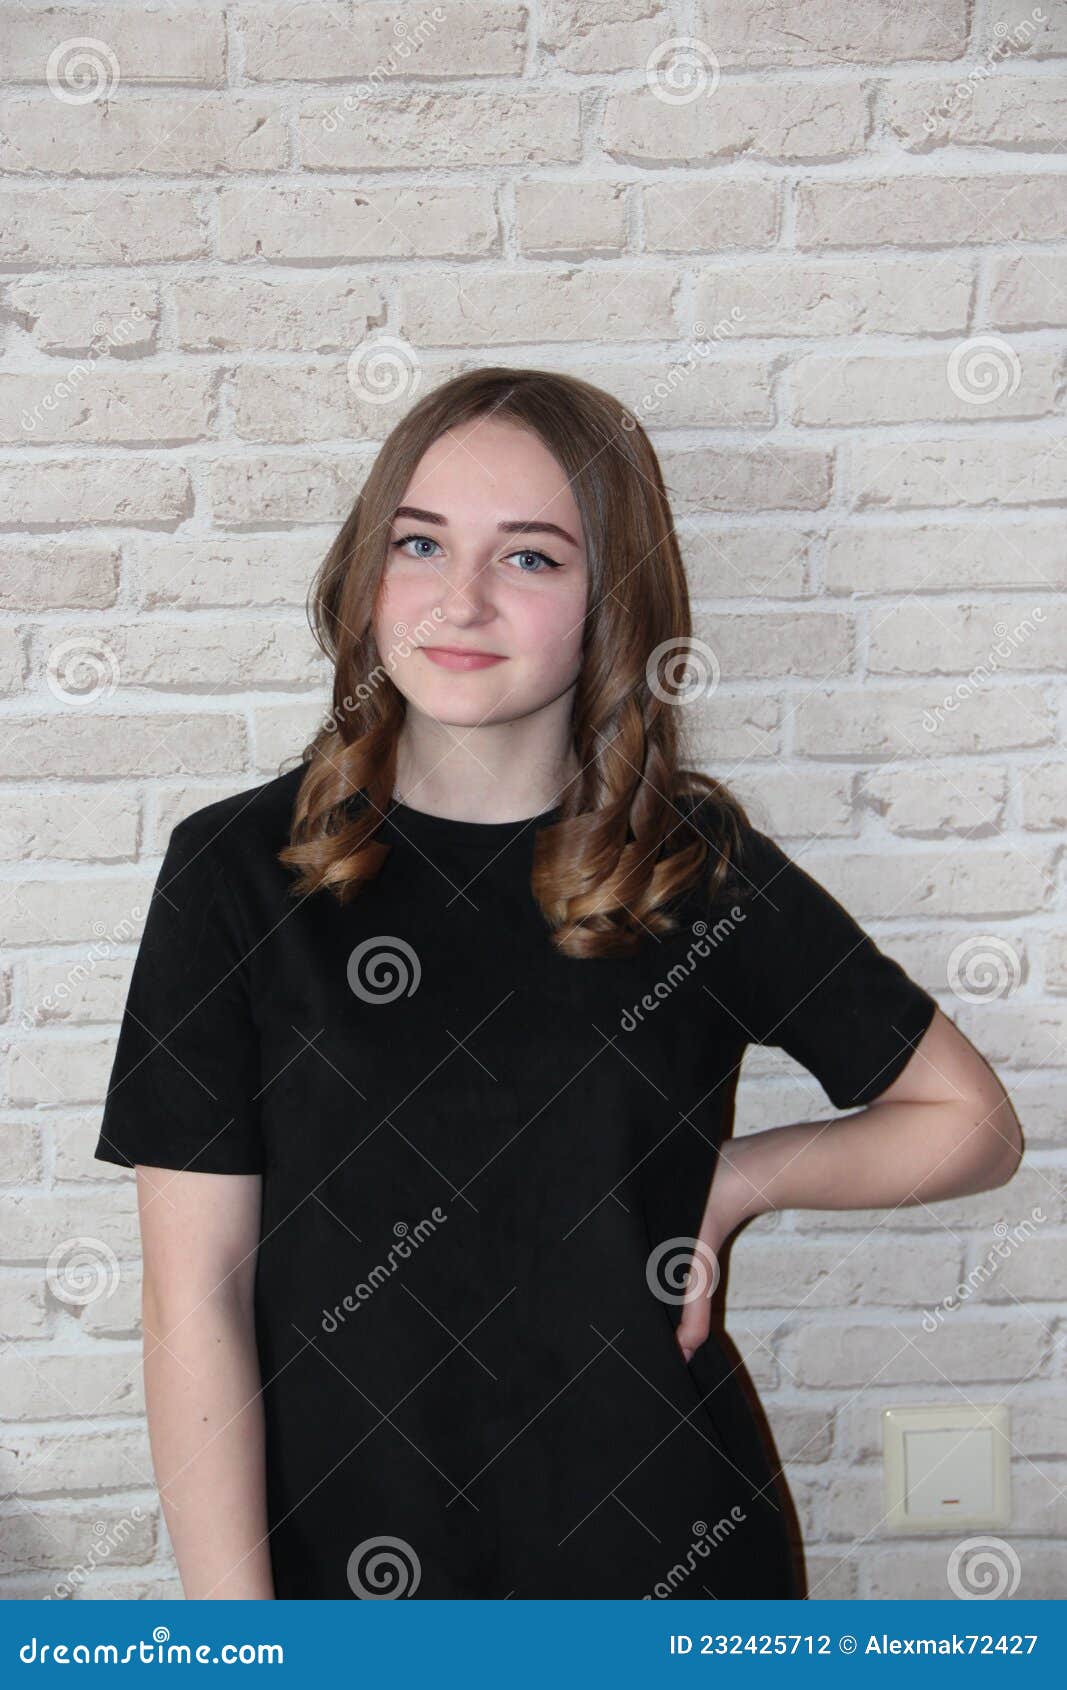 Girl with Lush Hairstyle Posing on Brick Wall Background. Girl in Black  Dress Stock Photo - Image of brick, child: 232425712